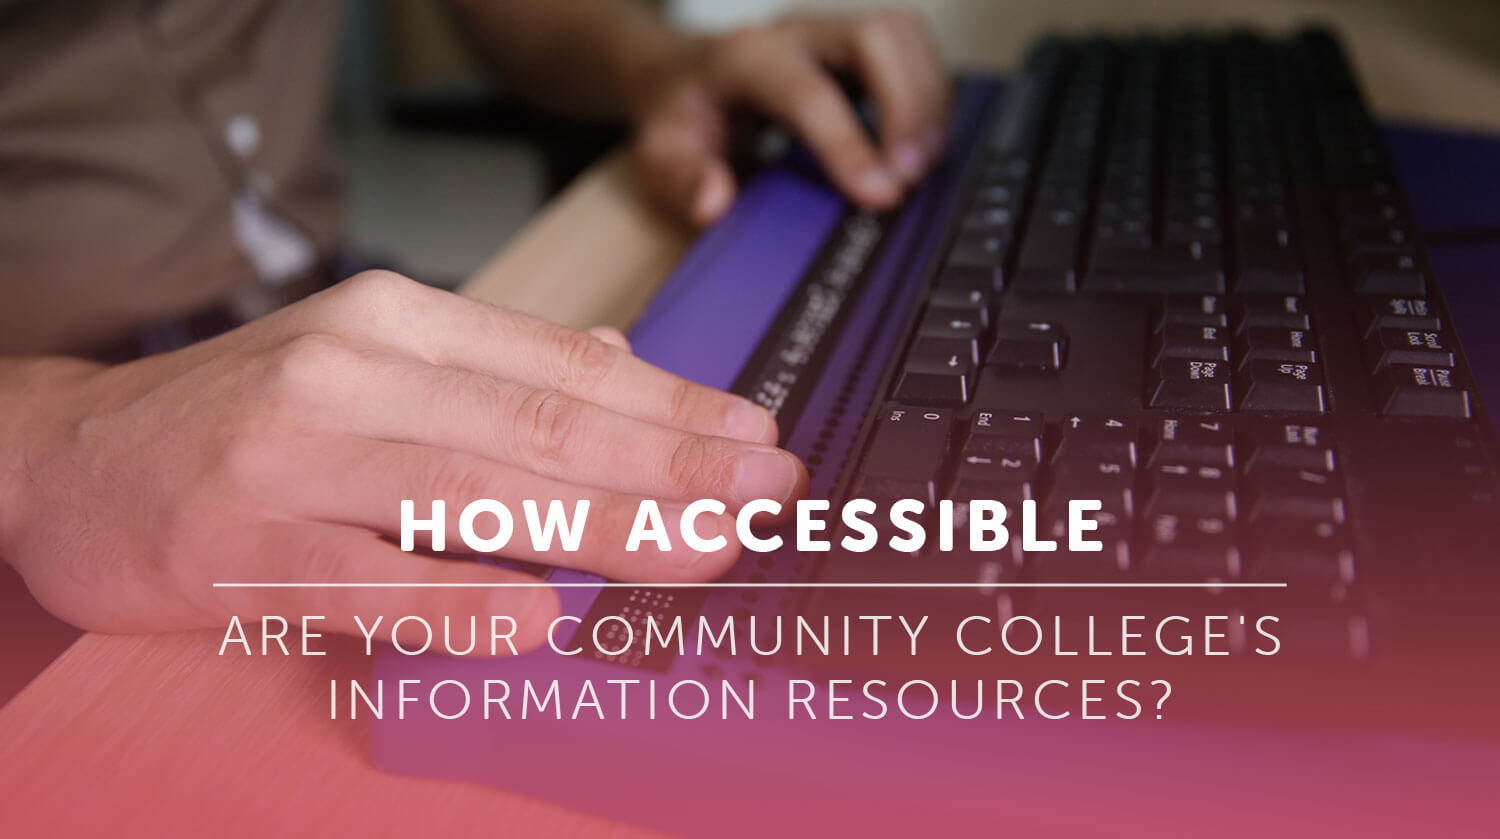 How Accessible Are Your Community College’s Information Resources?